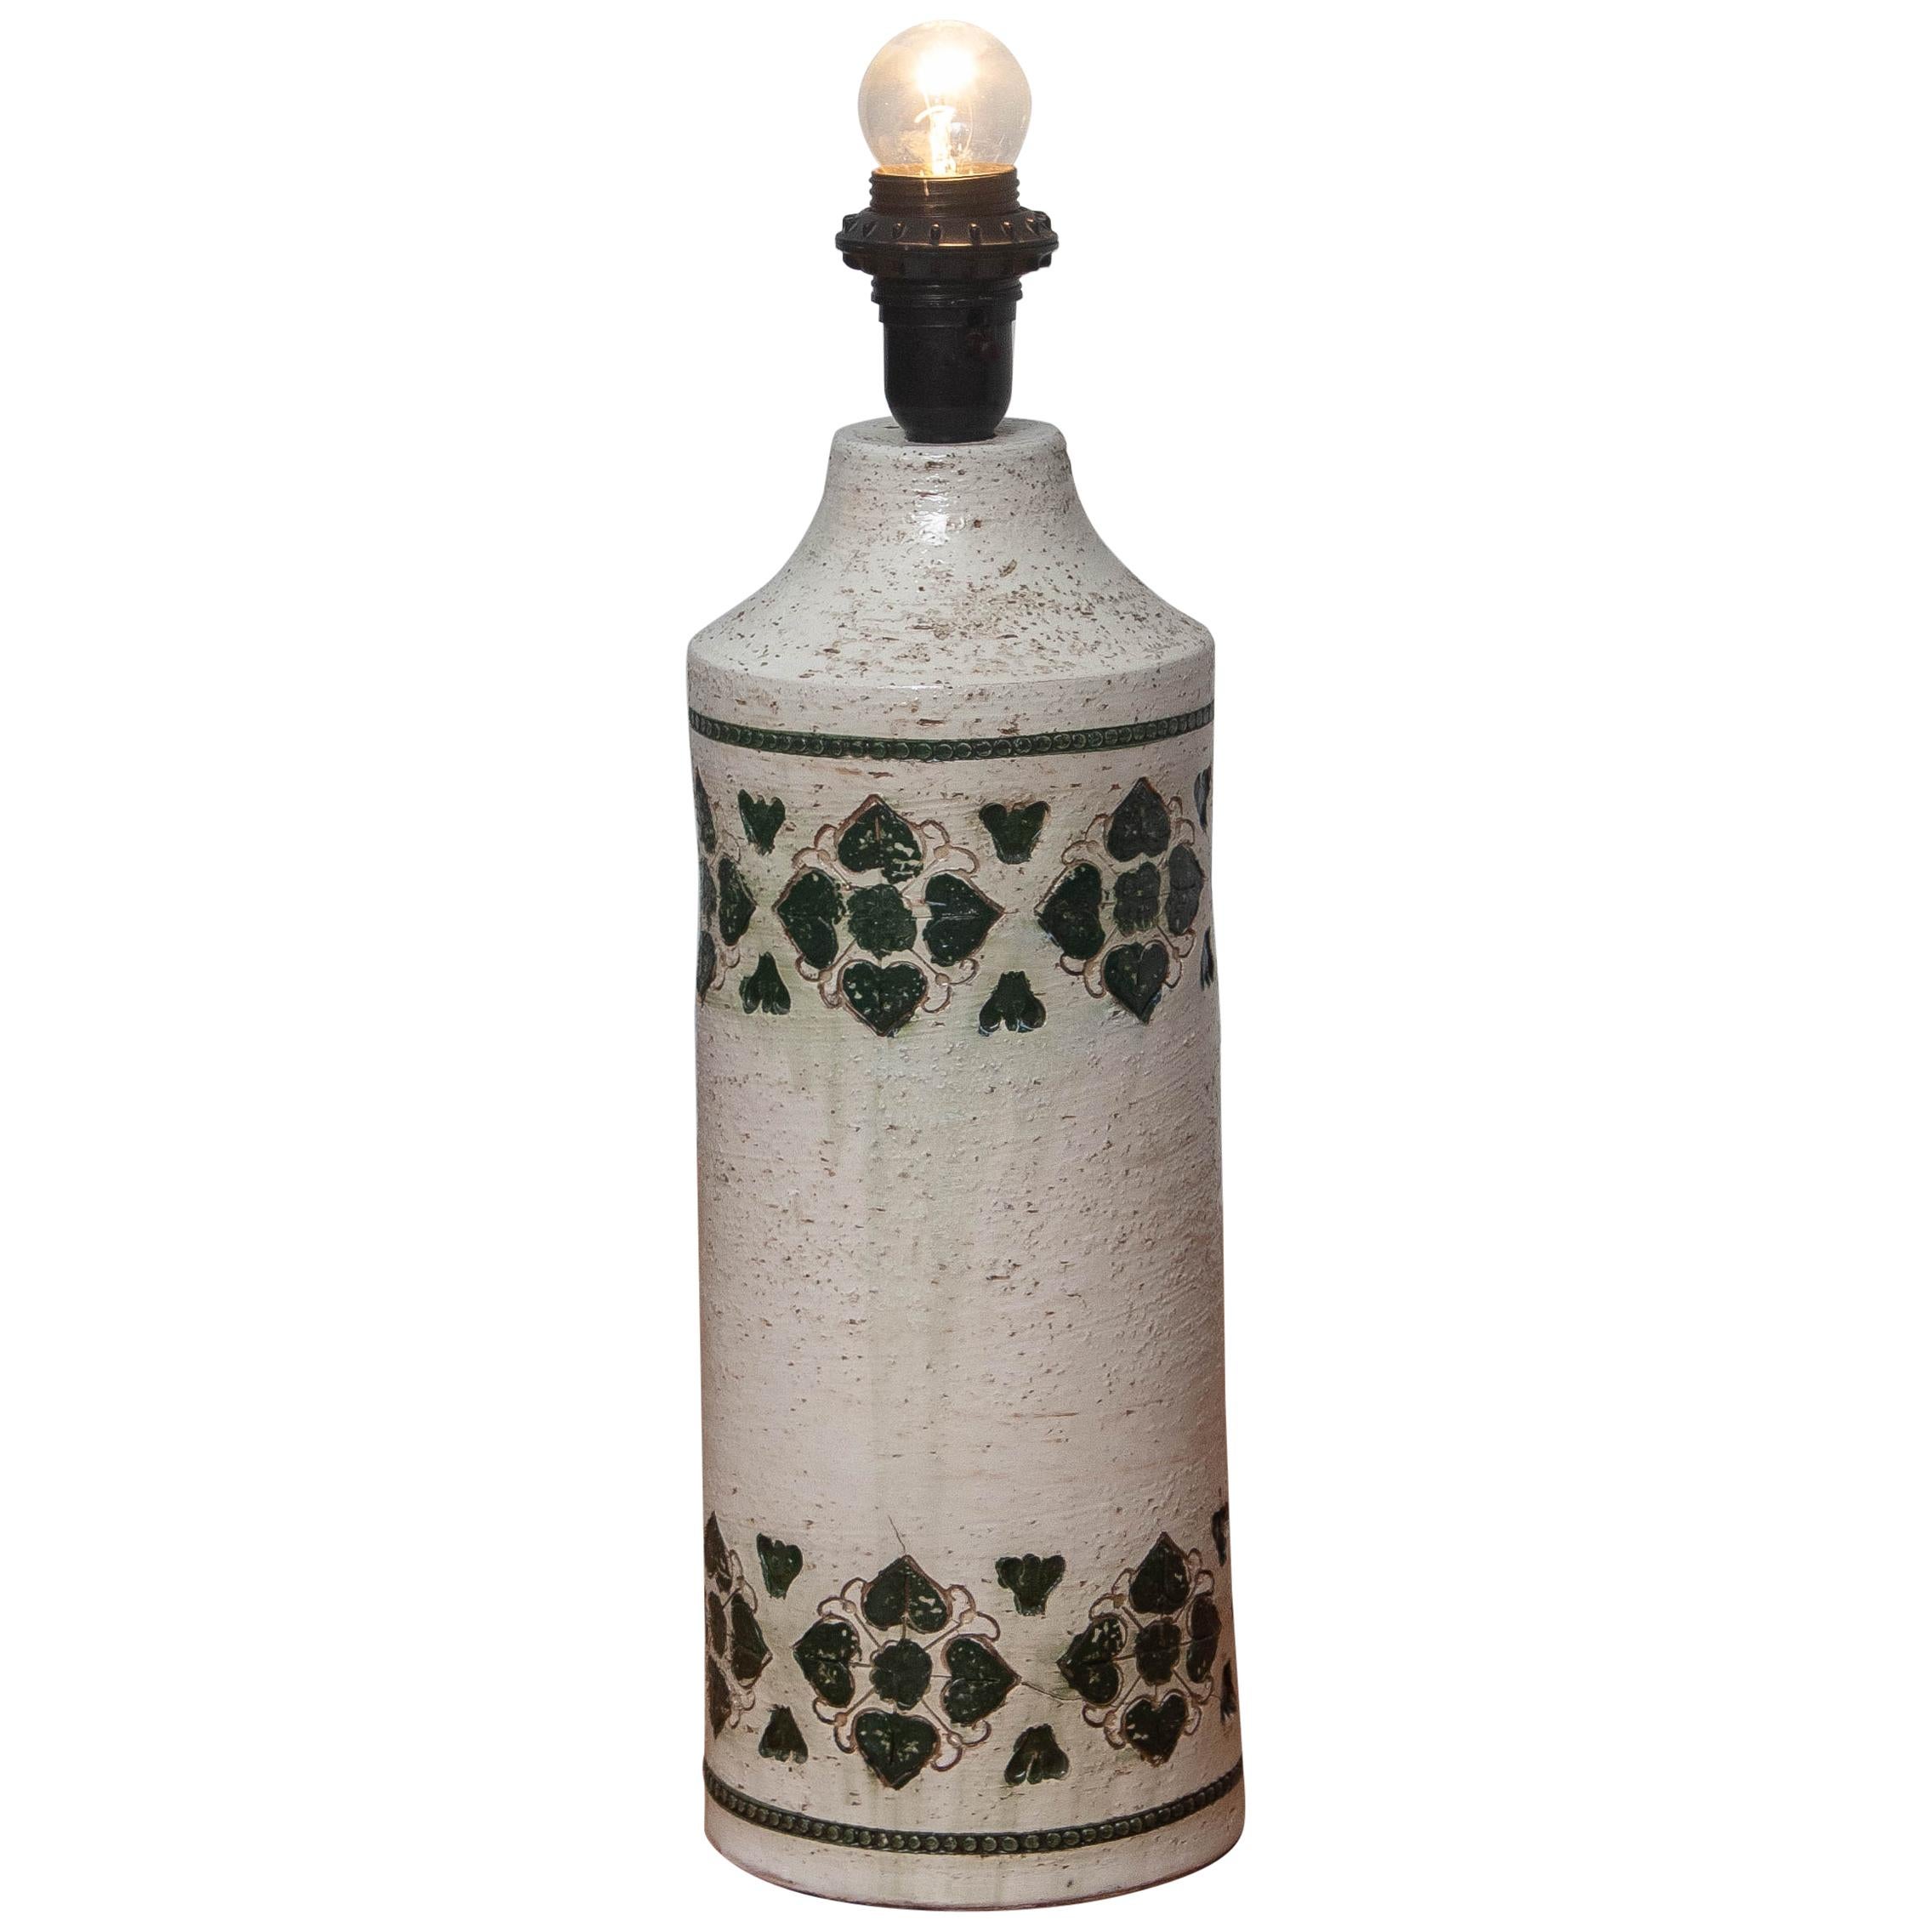 Very nice Italian ceramic lamp with an incised ivory/white and dark green geometric pattern.
This lamp is made by Bitossi for Bergboms.
  